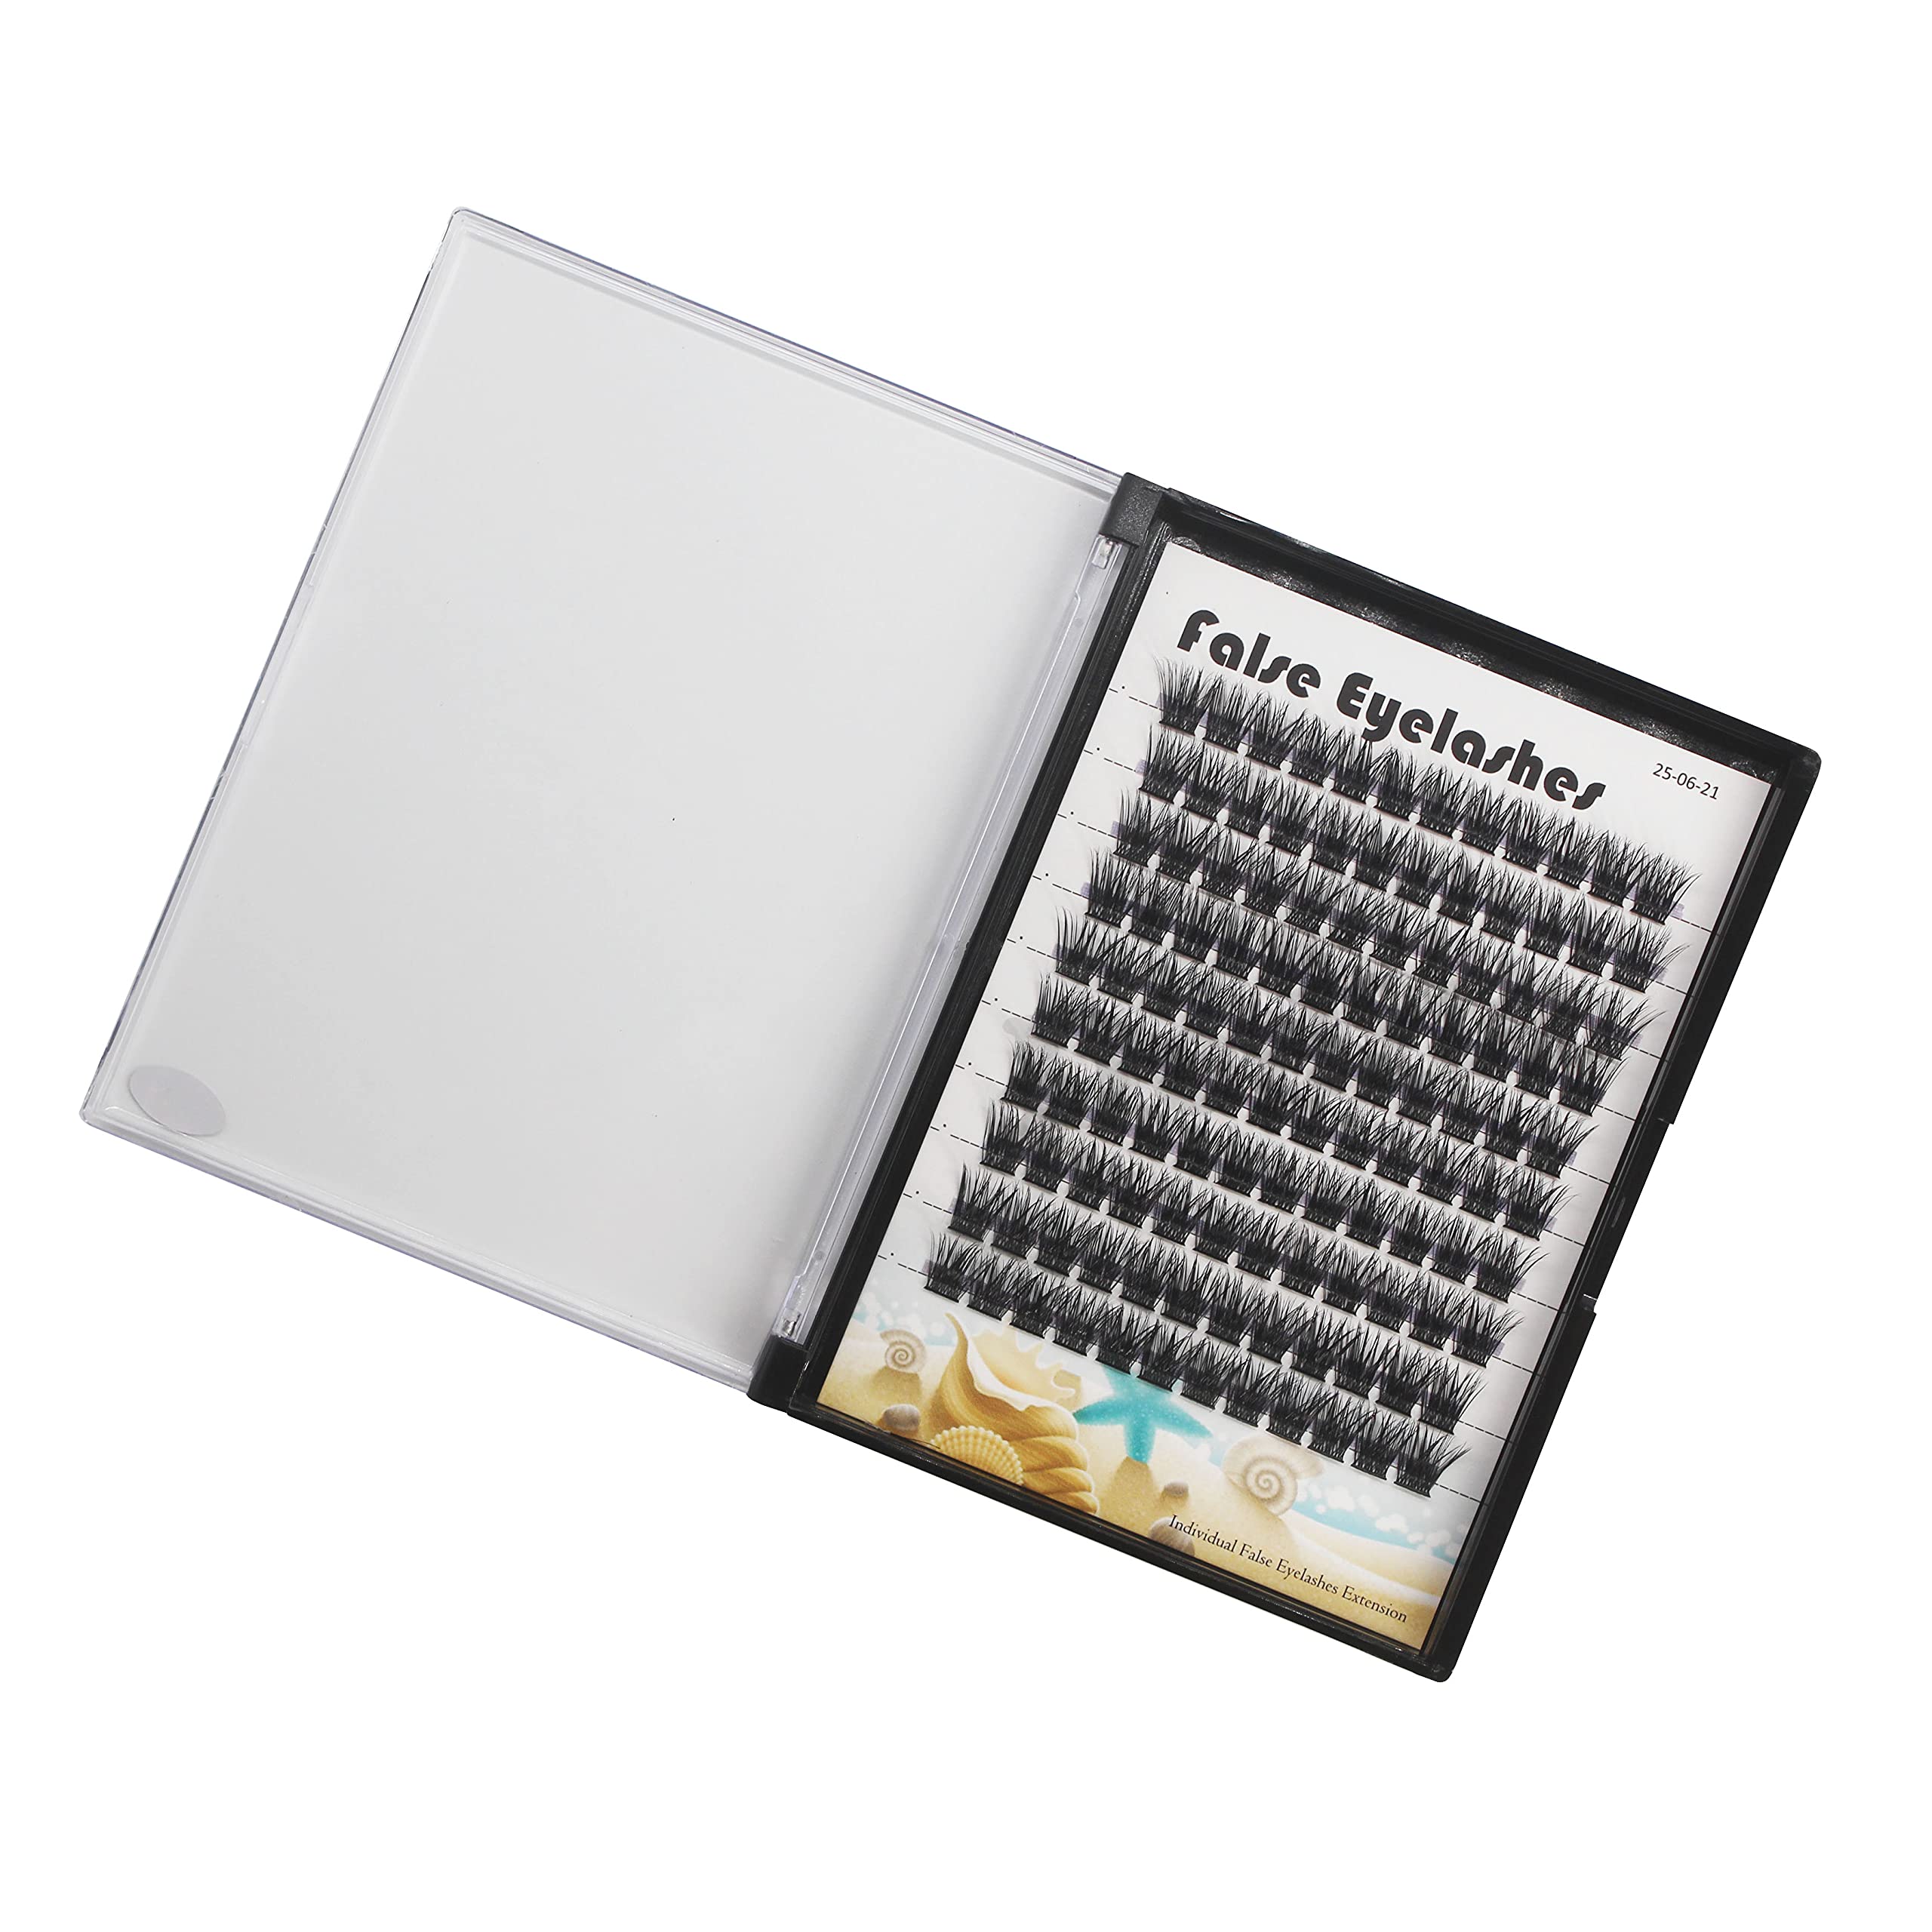 Large Tray- 10-20MM Available 120 Pcs D Curl Cluster Eyelashes Makeup Volume Eye Lashes Extensions Natural Long Wide Stem Individual False Eyelashes (12mm)